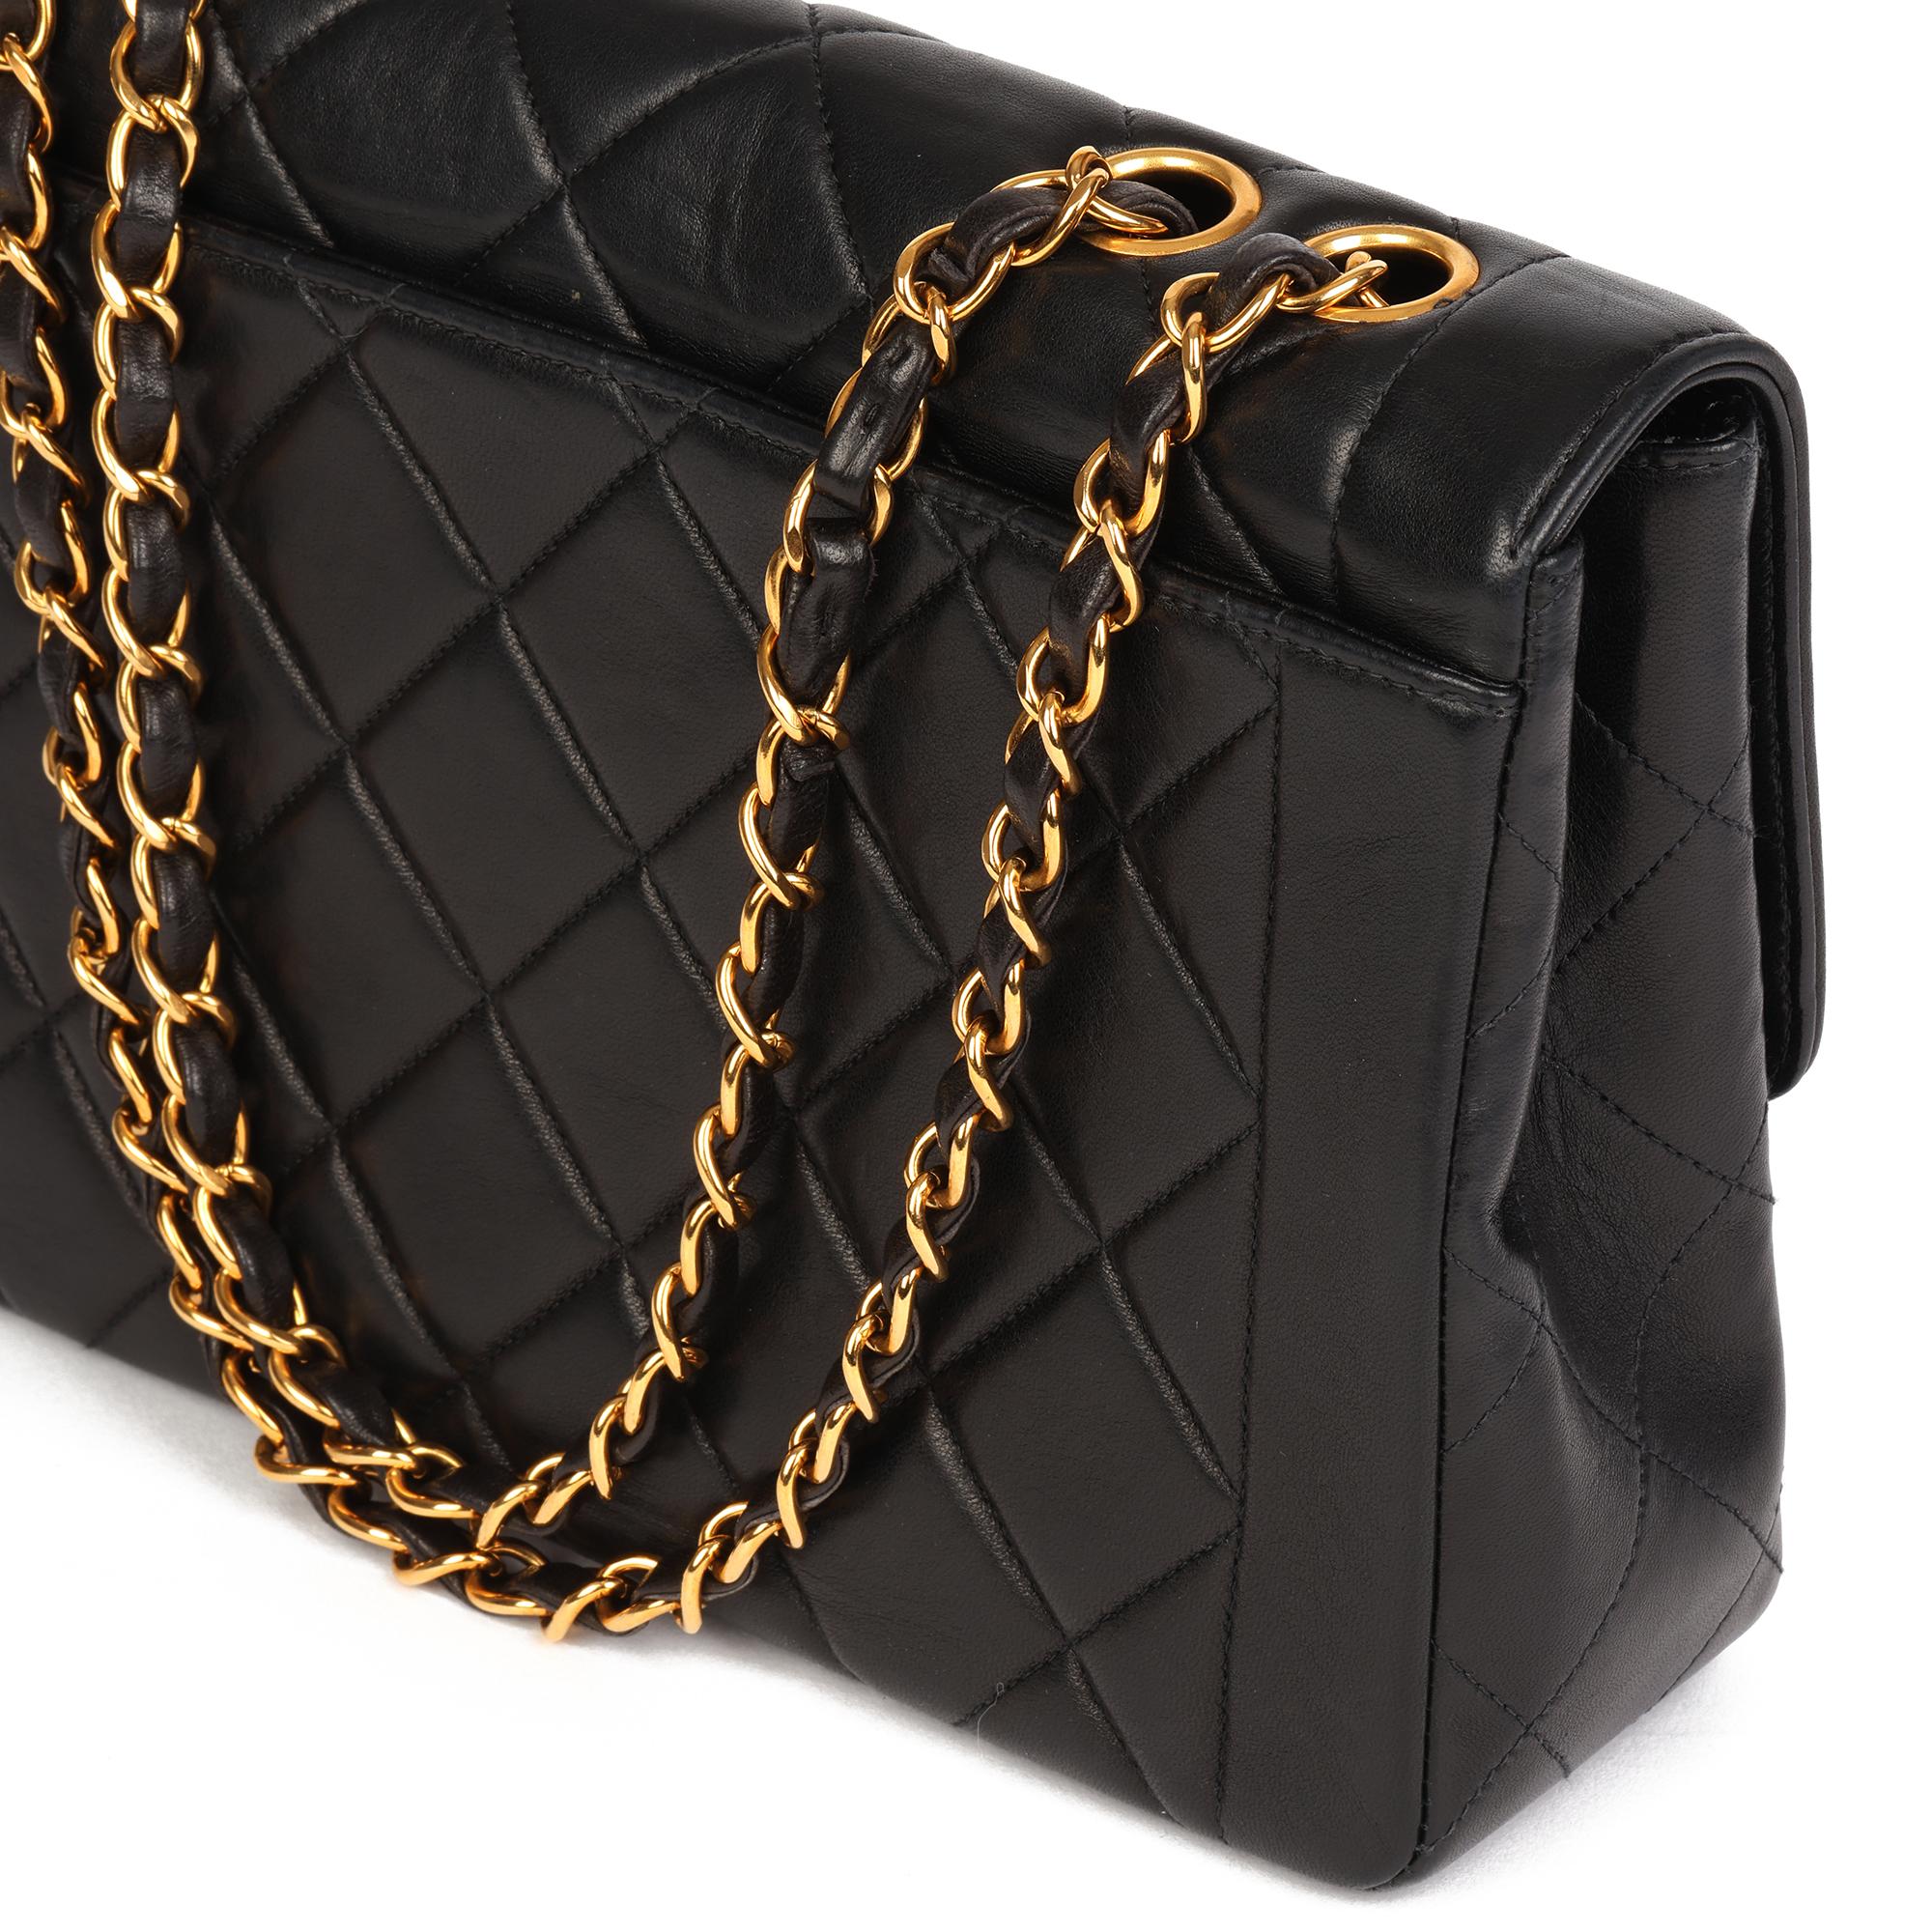 1997 Chanel Black Quilted Lambskin Vintage Classic Single Flap Bag  4